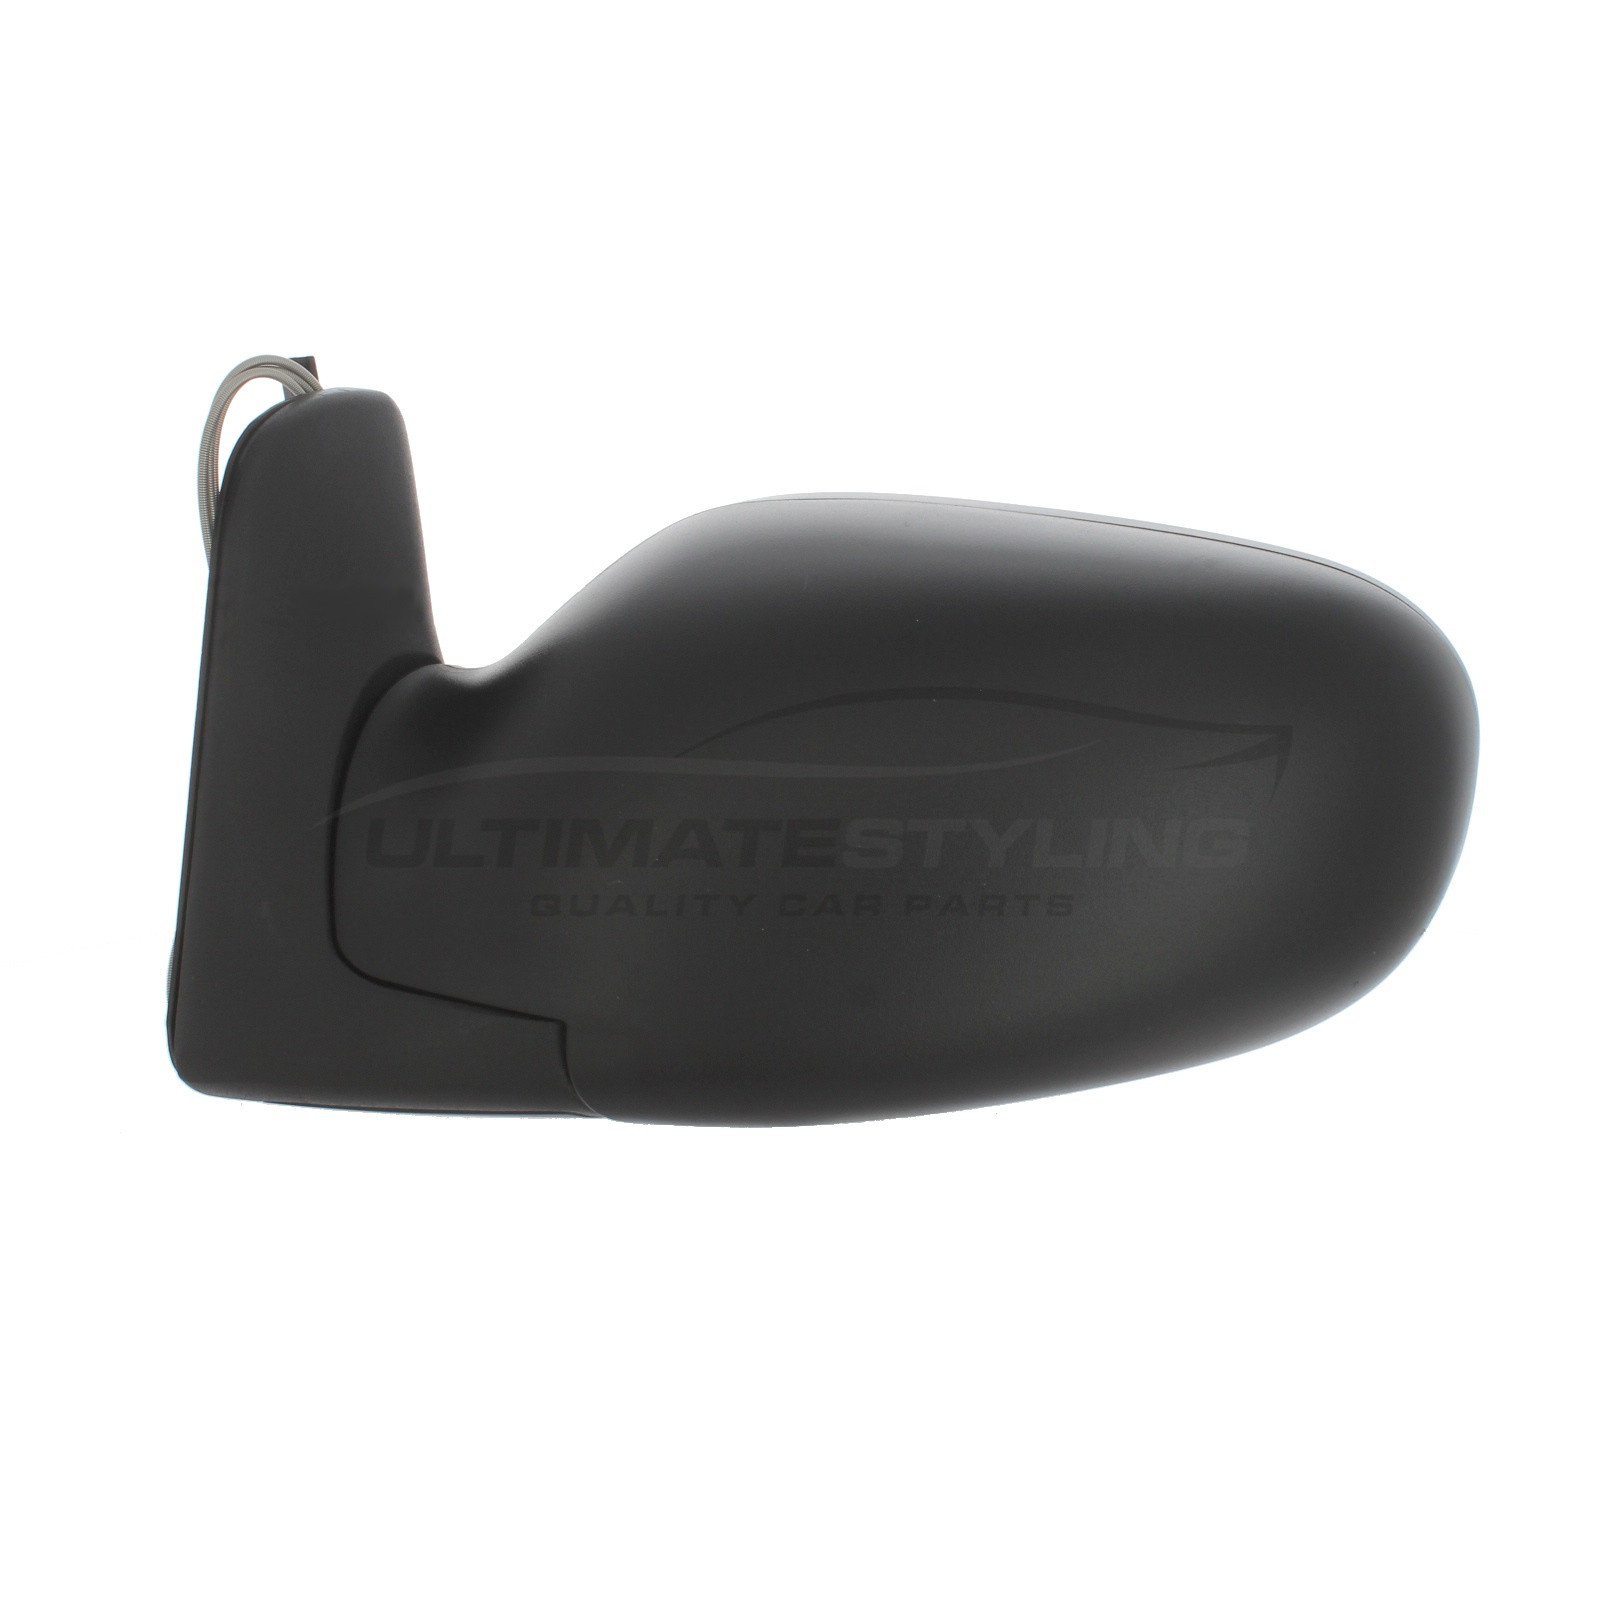 Ford Galaxy, LTI TX1 / TX2 / TX4, MCW Metrocab, Seat Alhambra, Volkswagen Sharan Wing Mirror / Door Mirror - Passenger Side (LH) - Cable adjustment - Non-Heated Glass - Black